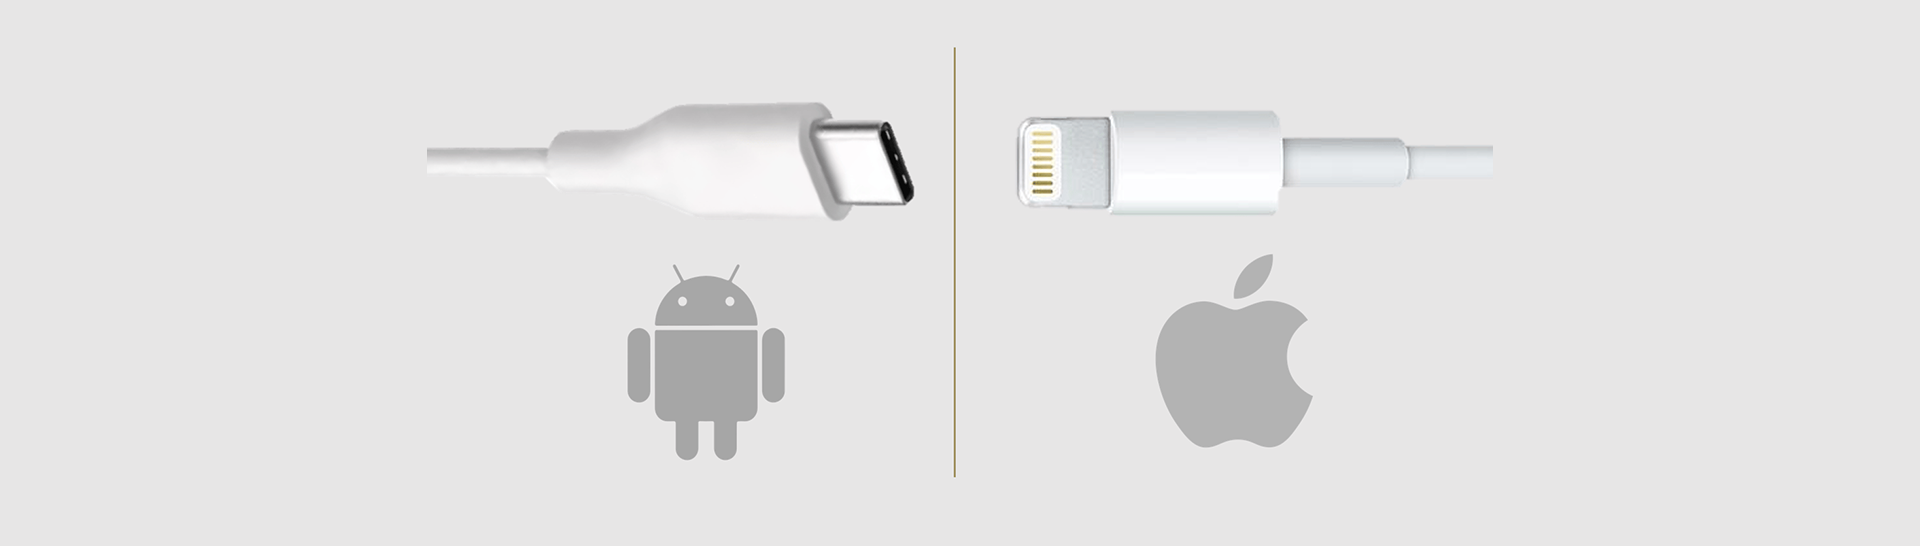 Apple forced away from lightning charger resized